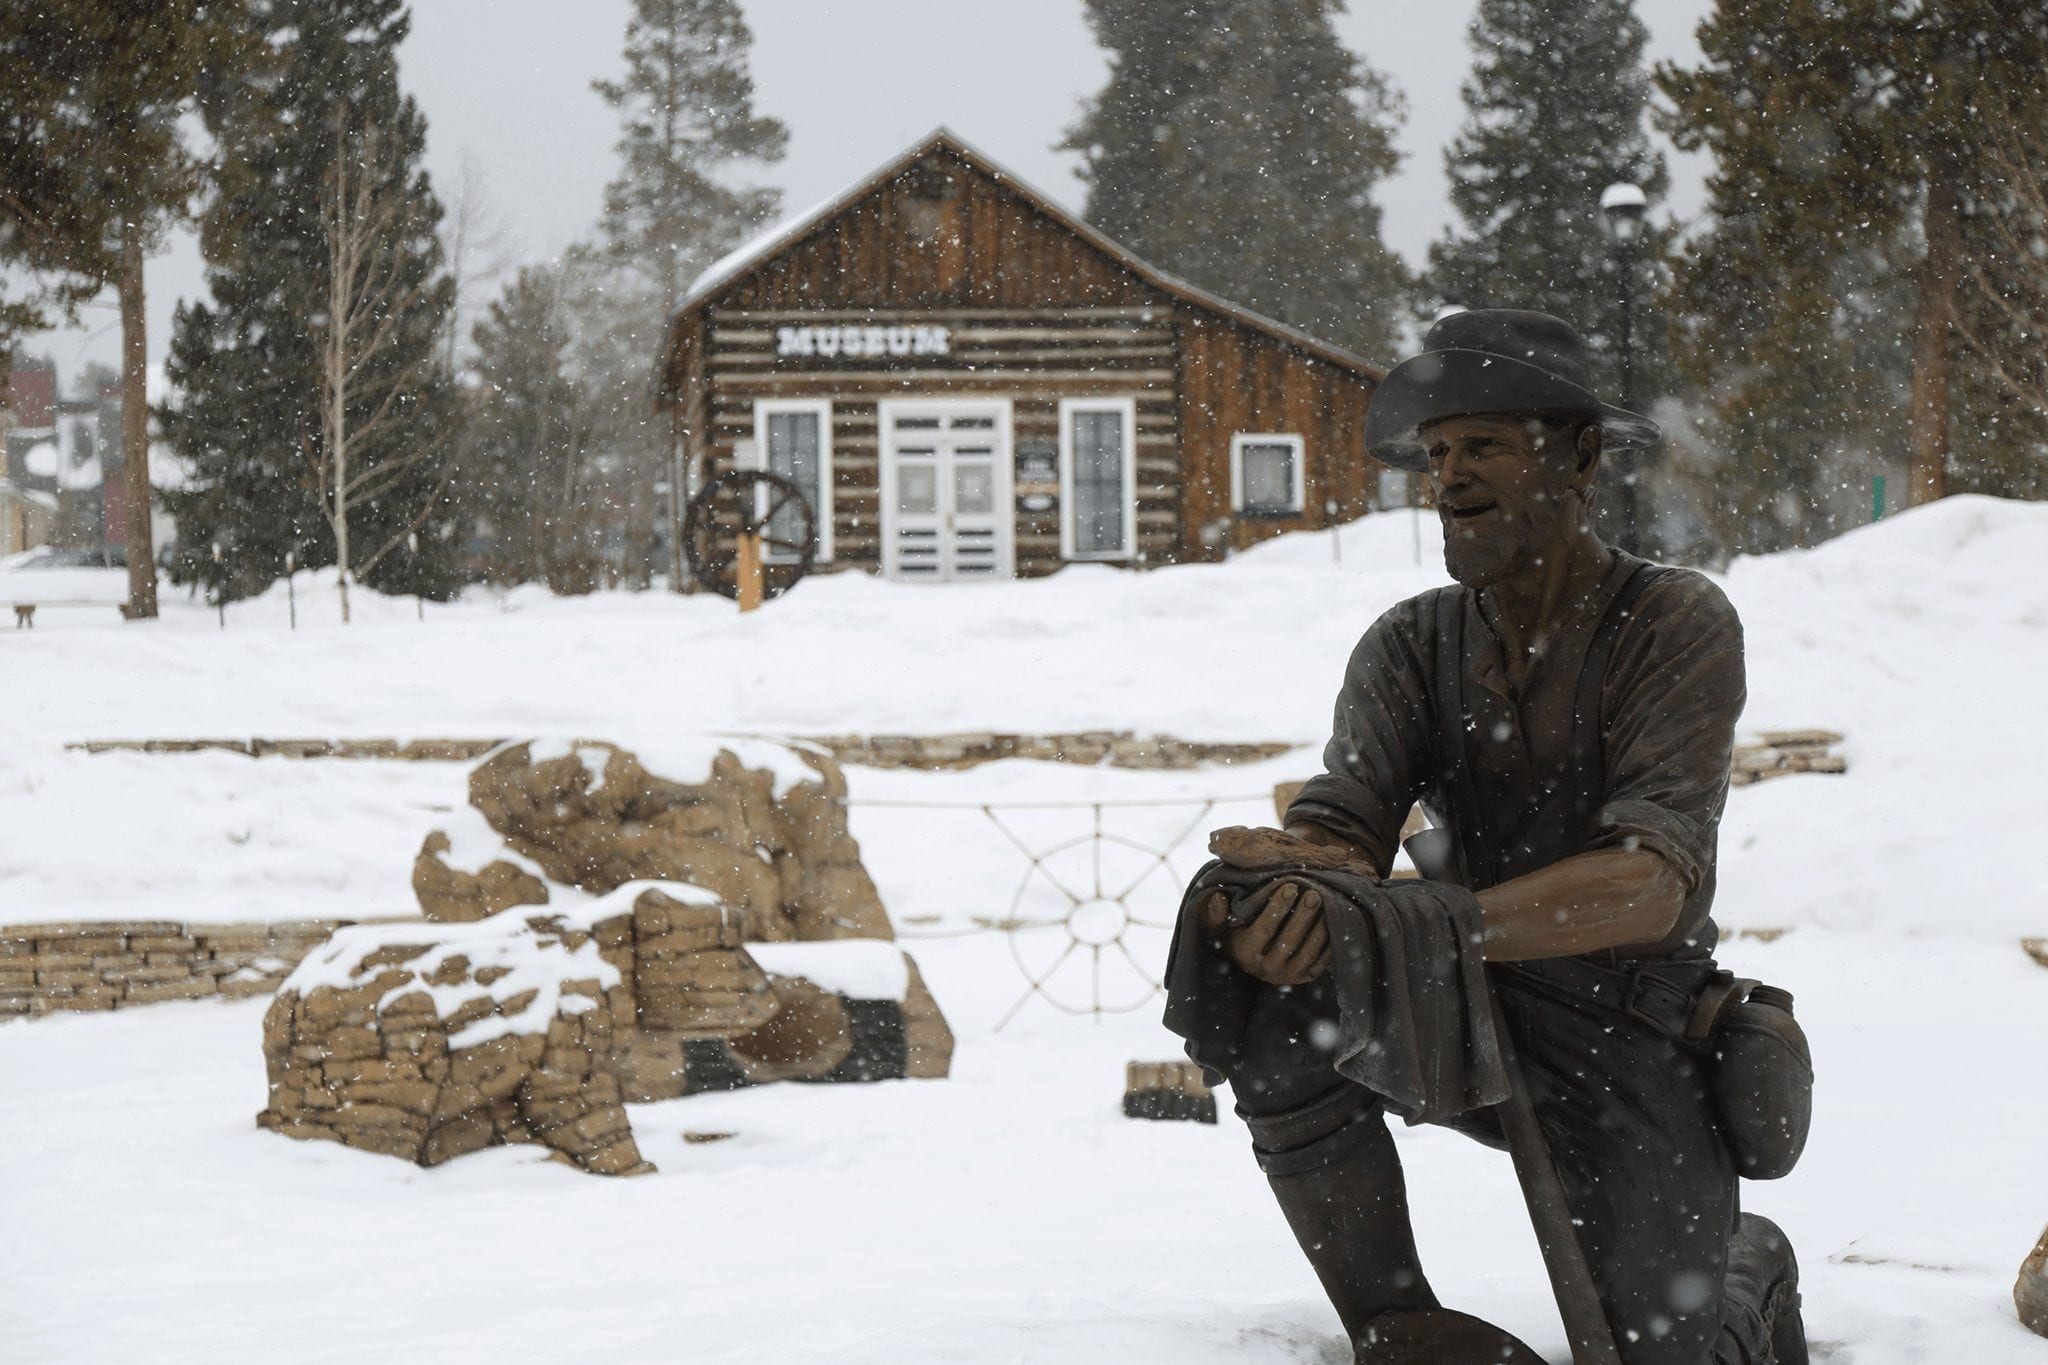 Snow falling in front of museum with statue in Breckenridge Colorado